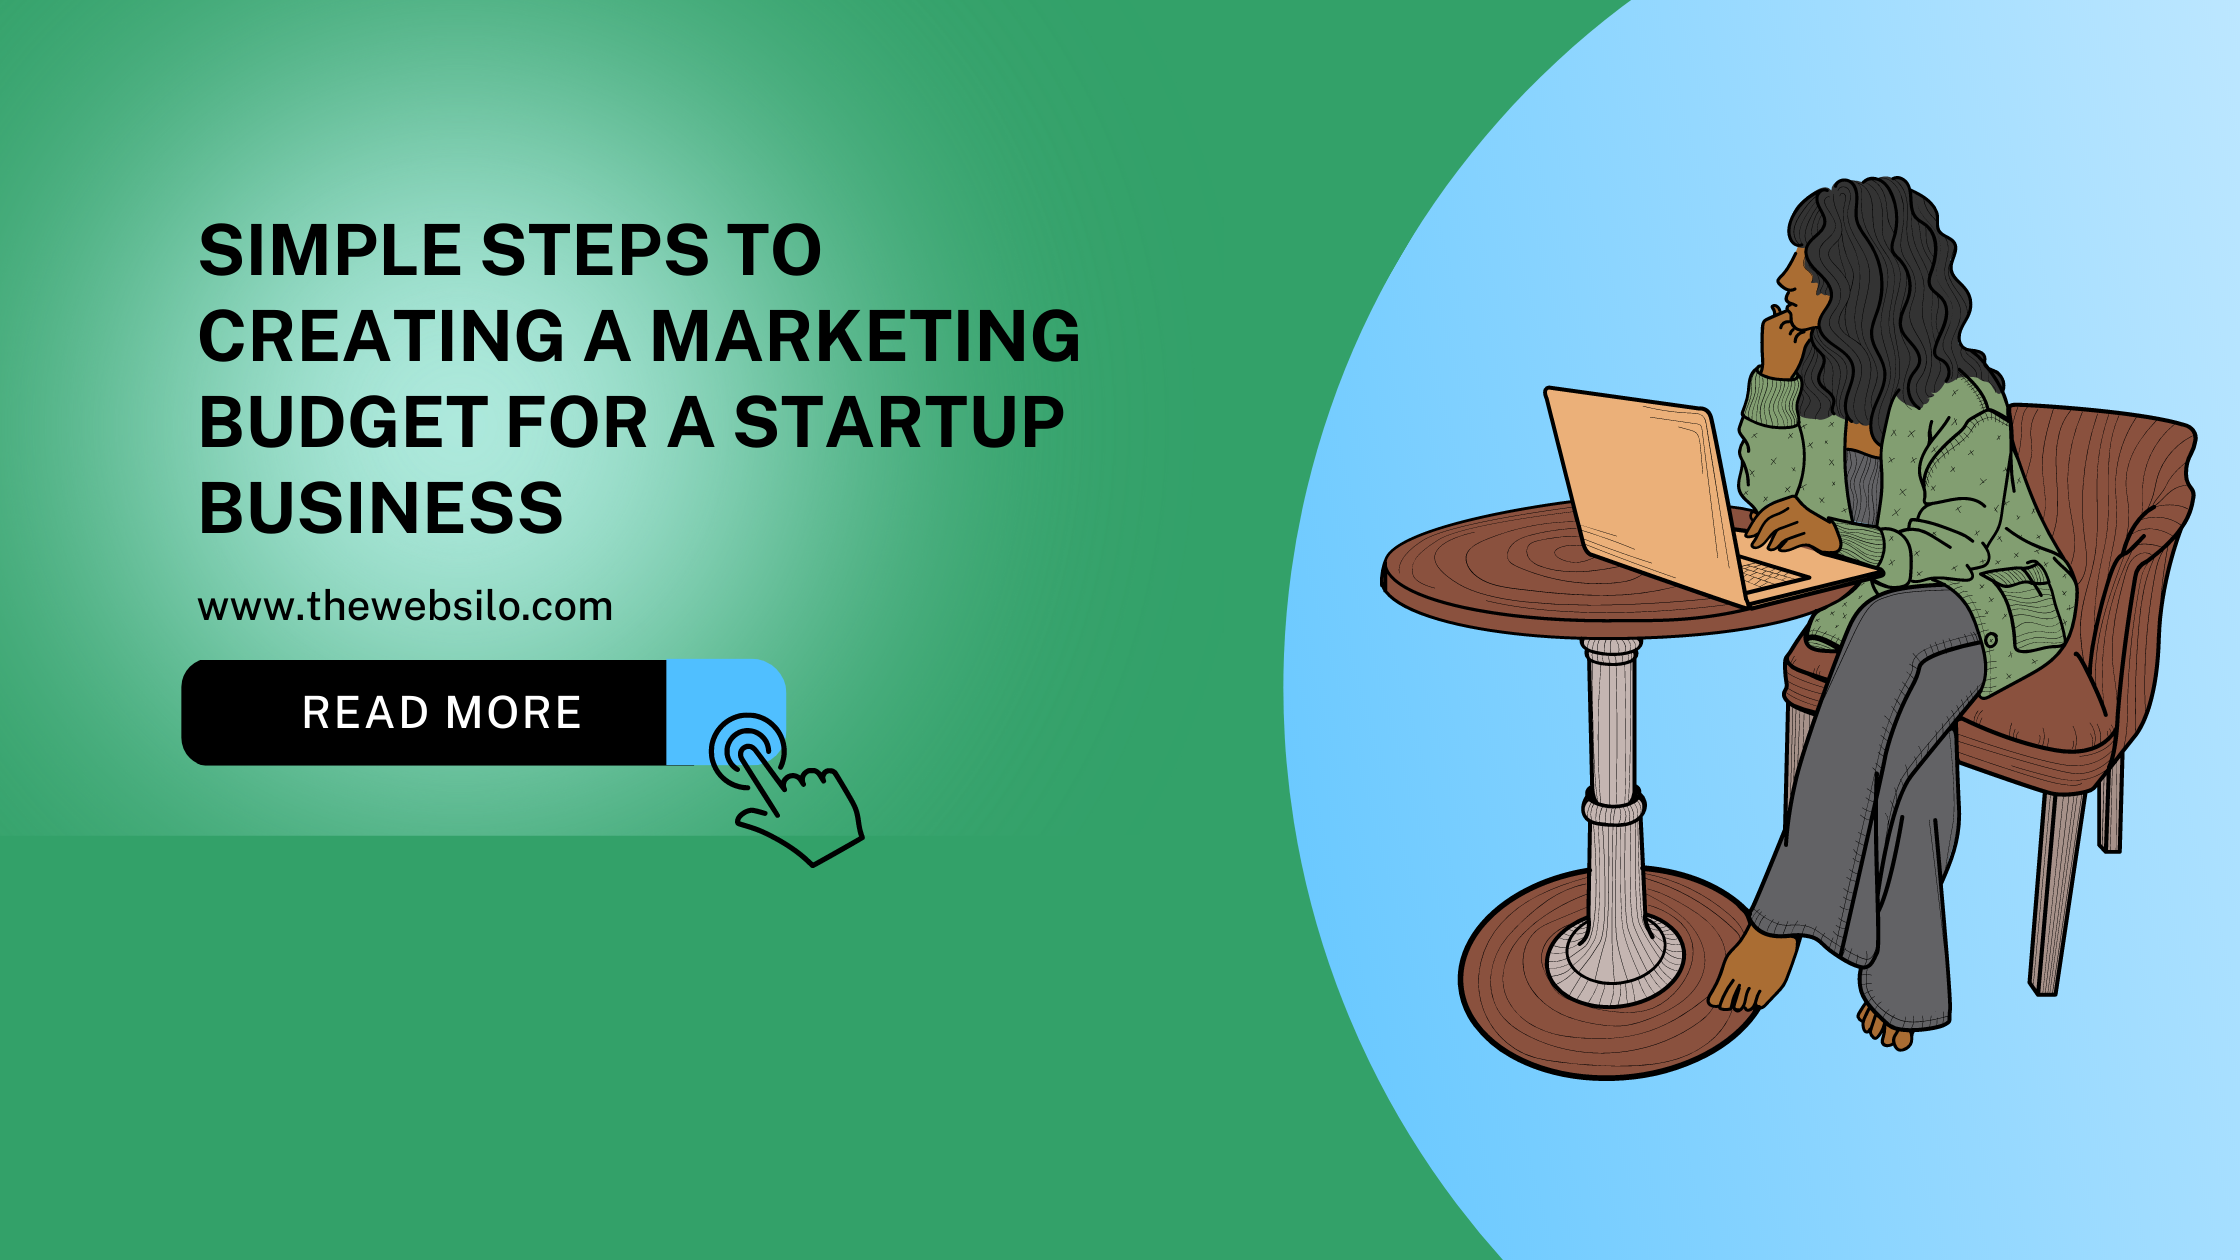 Simple Steps to Creating a Marketing Budget for a Startup Business